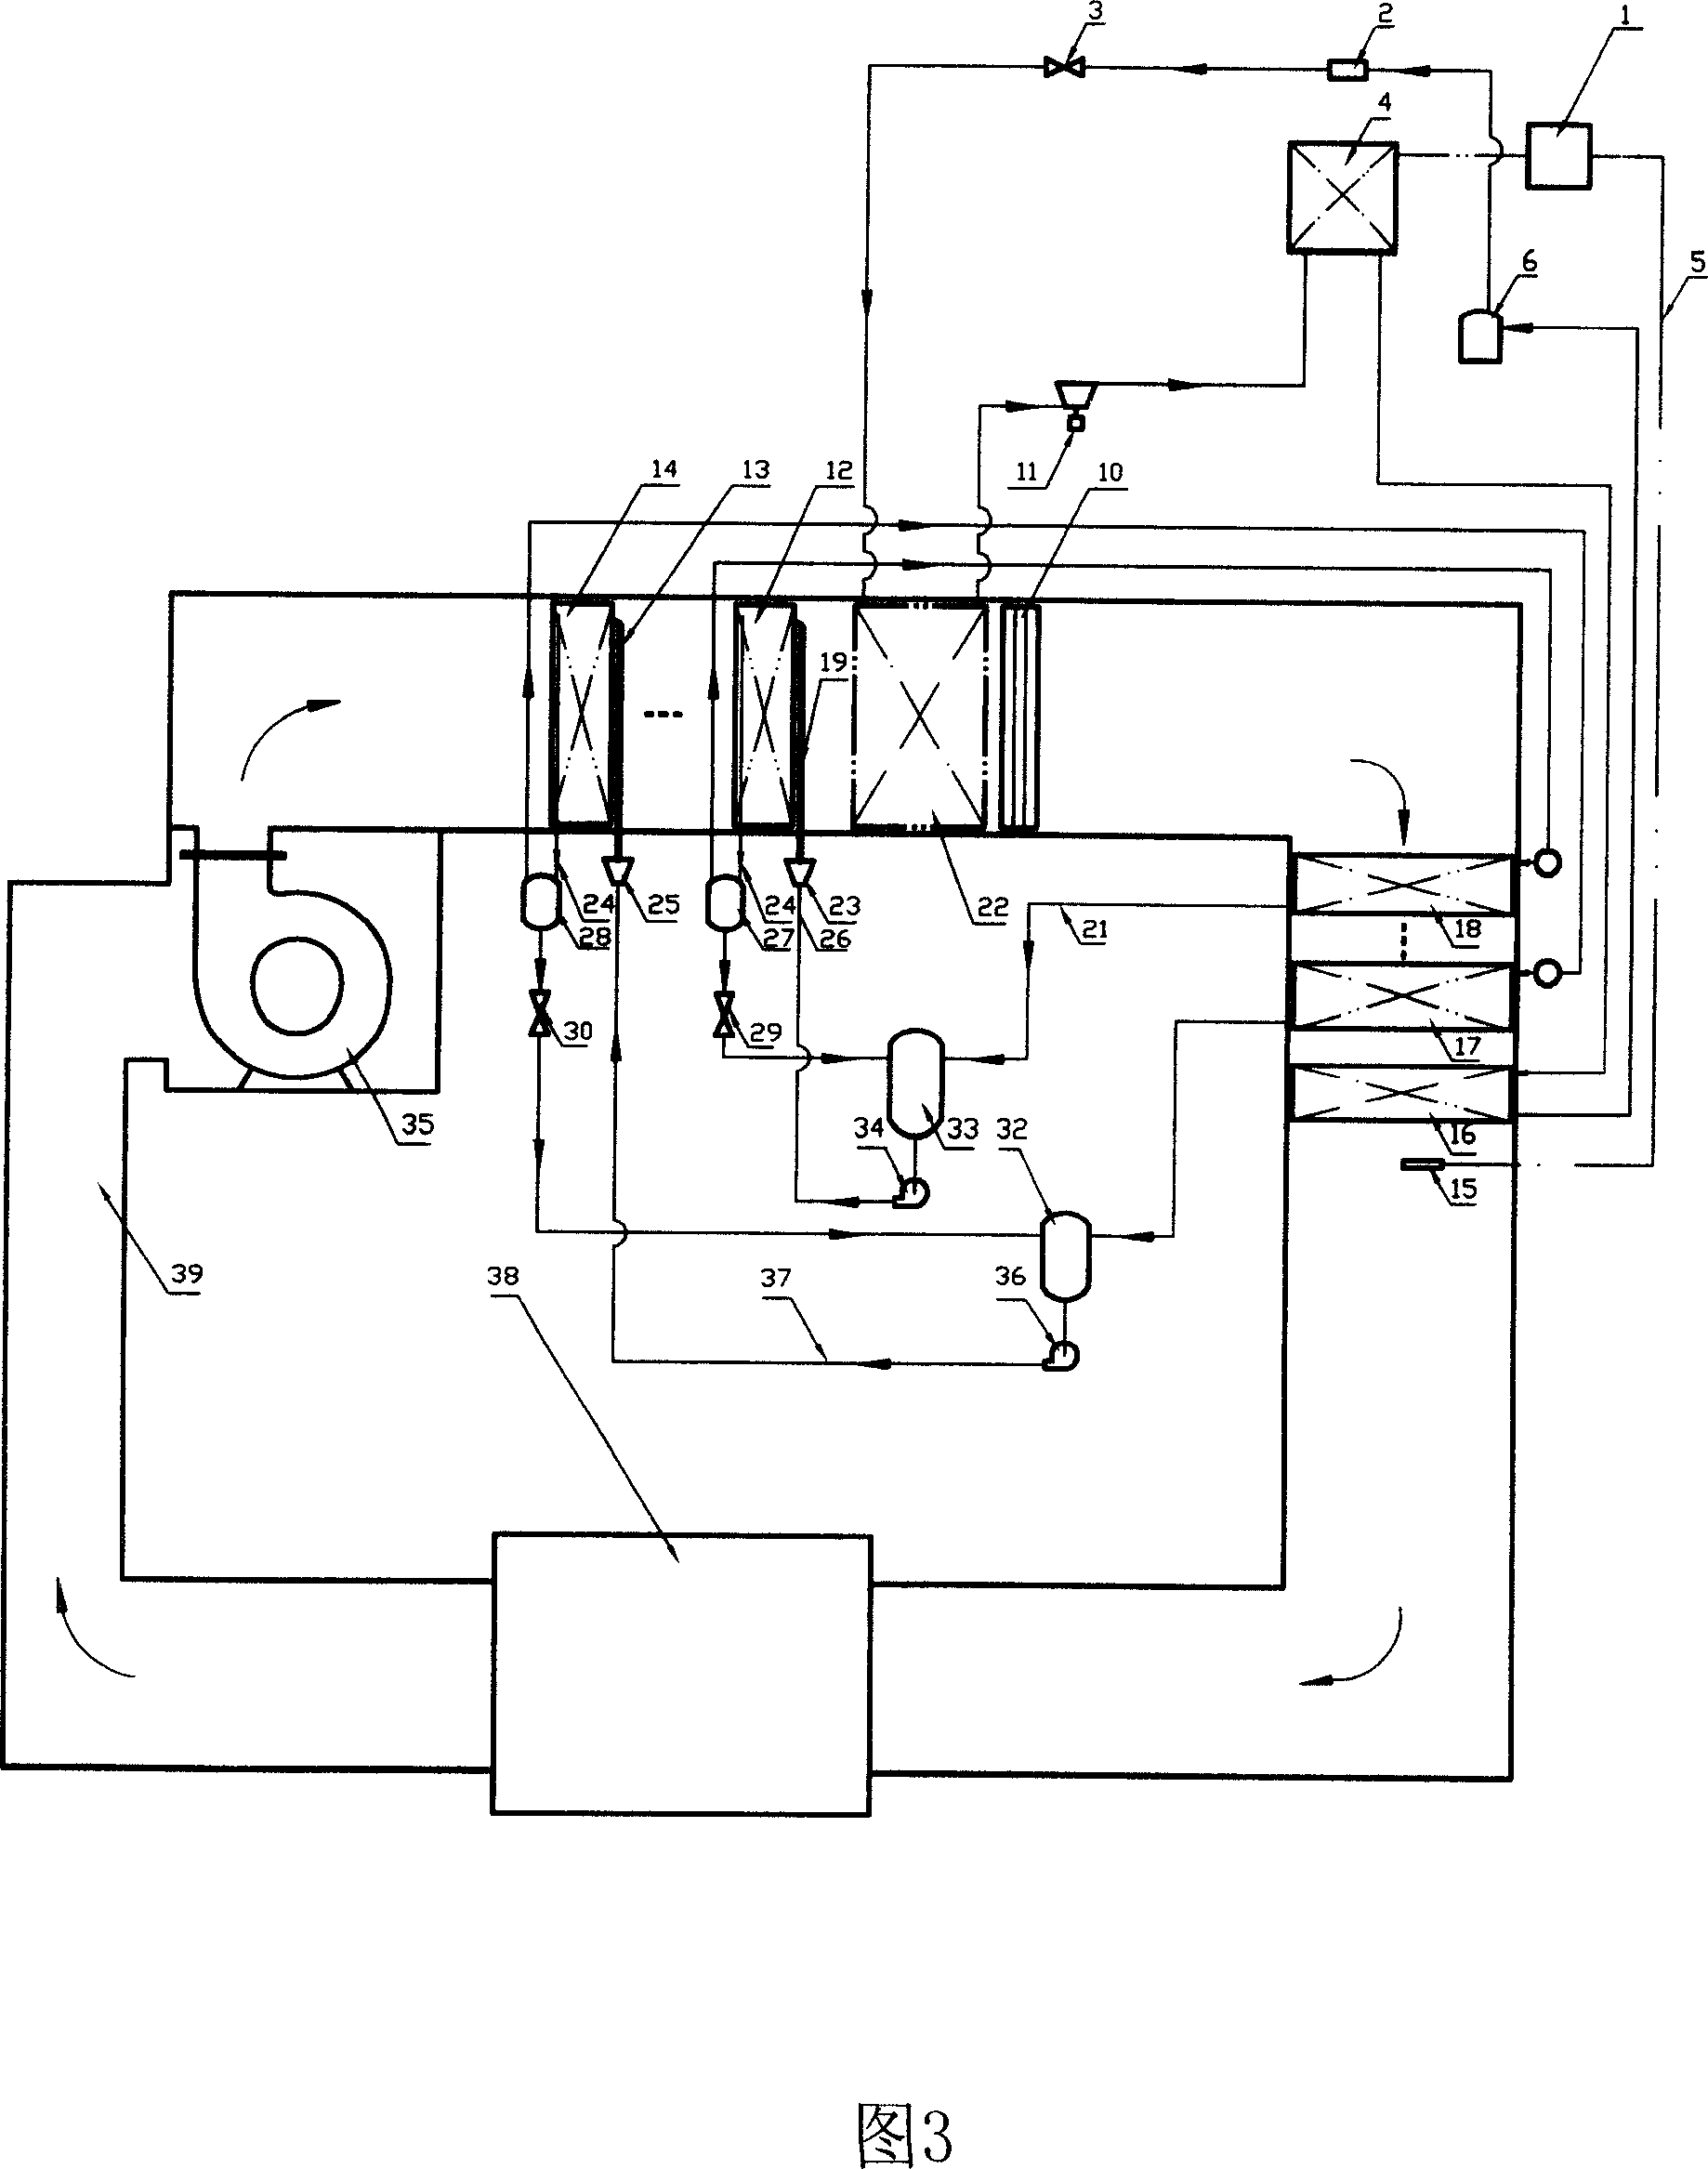 Heat pipe hot pump composite drying power source system